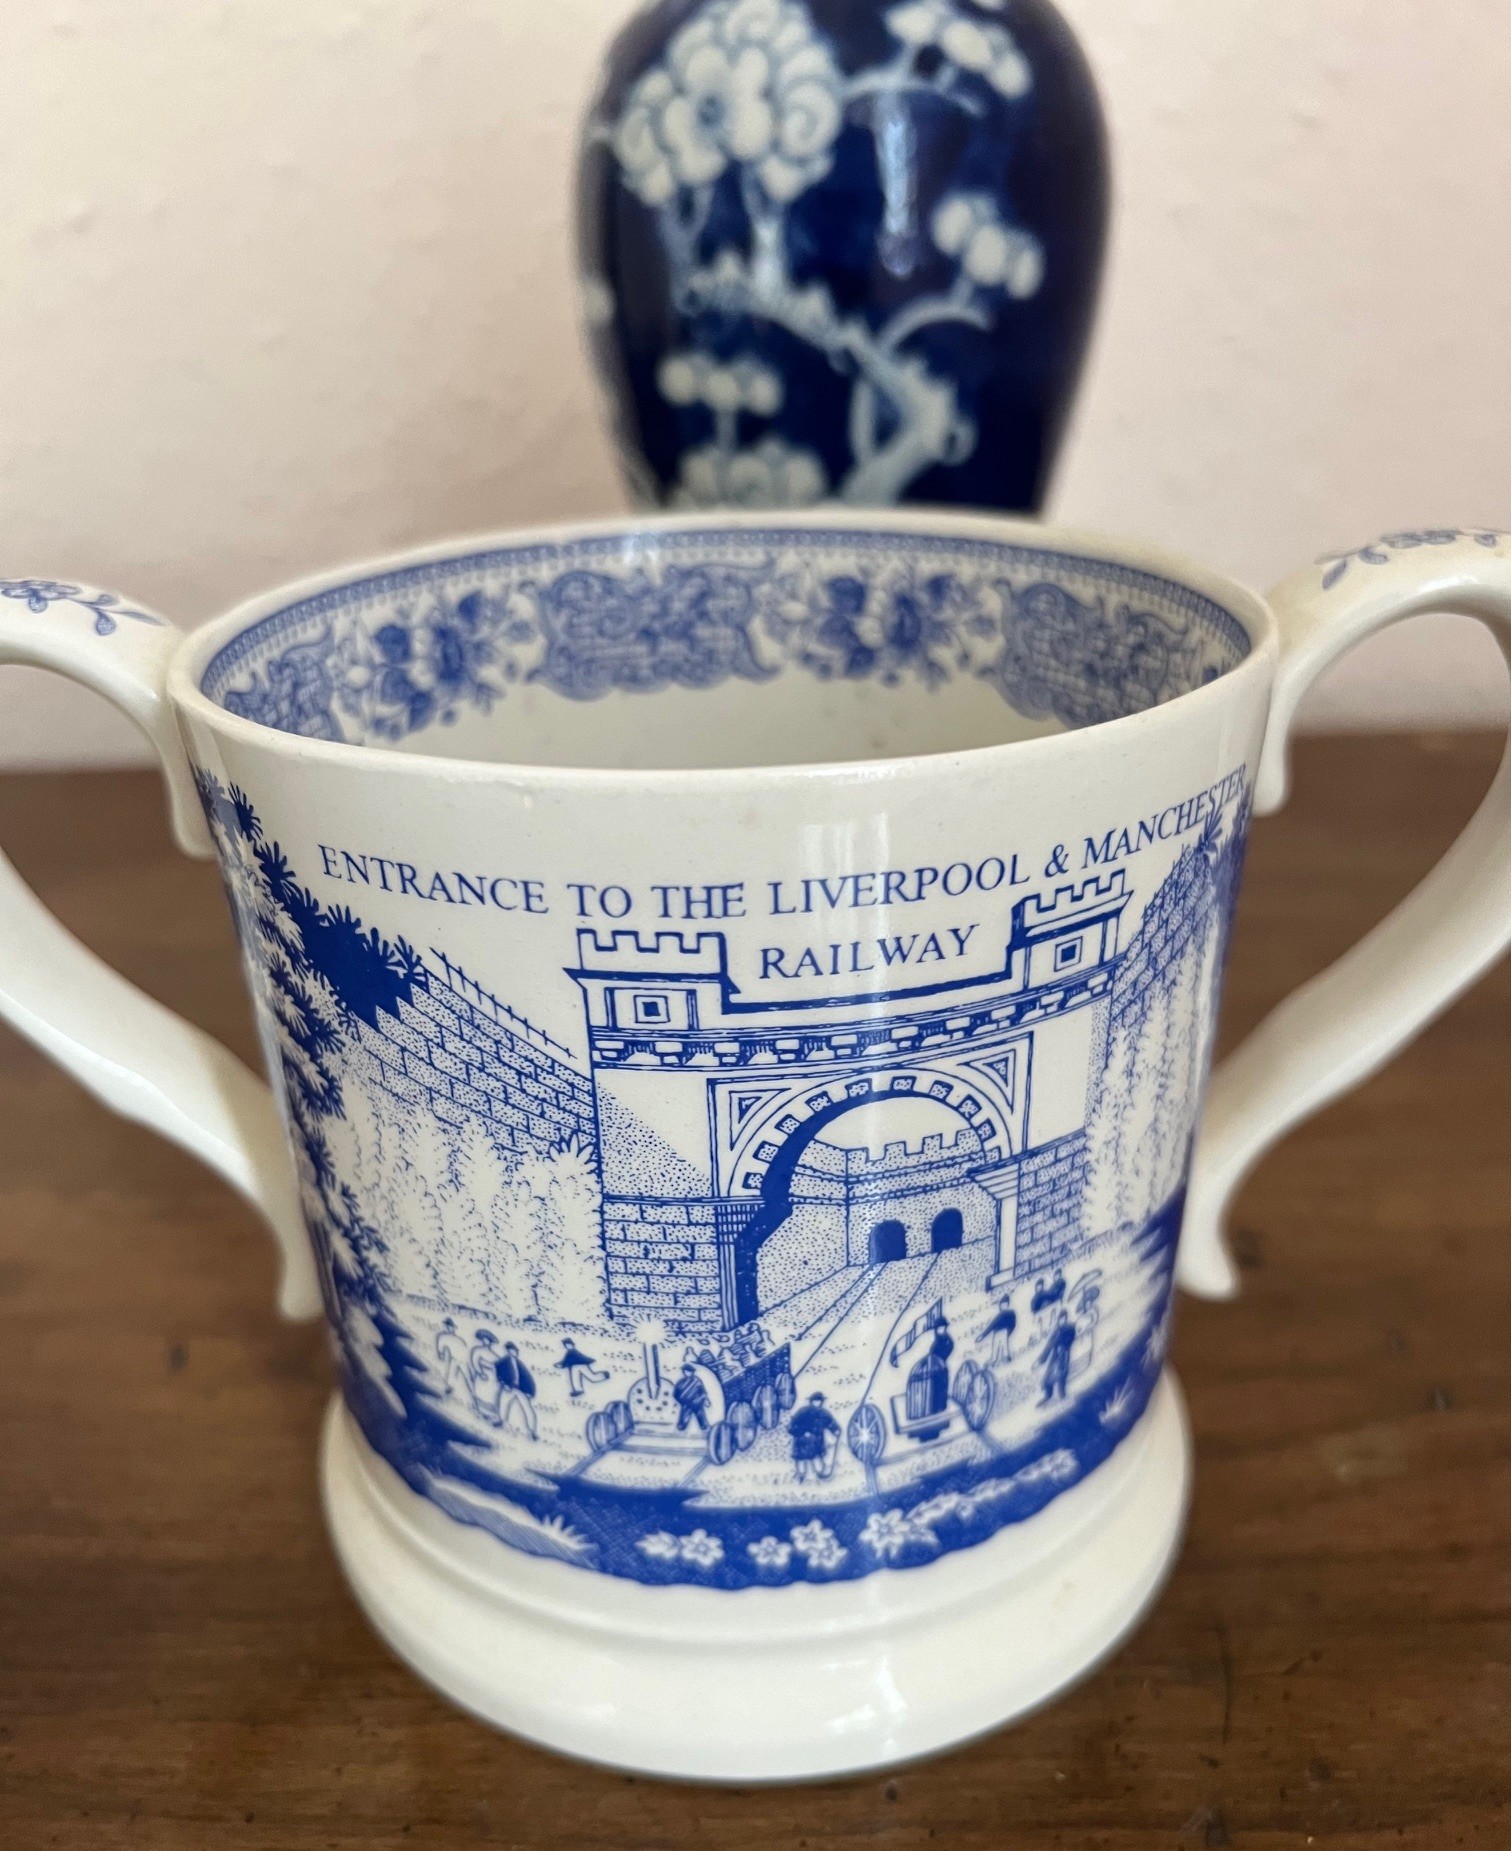 JAPANESE VASE AND BLUE AND WHITE LIVERPOOL MANCHESTER RAILWAY TANKARD VASE AT FAULT - Image 2 of 2